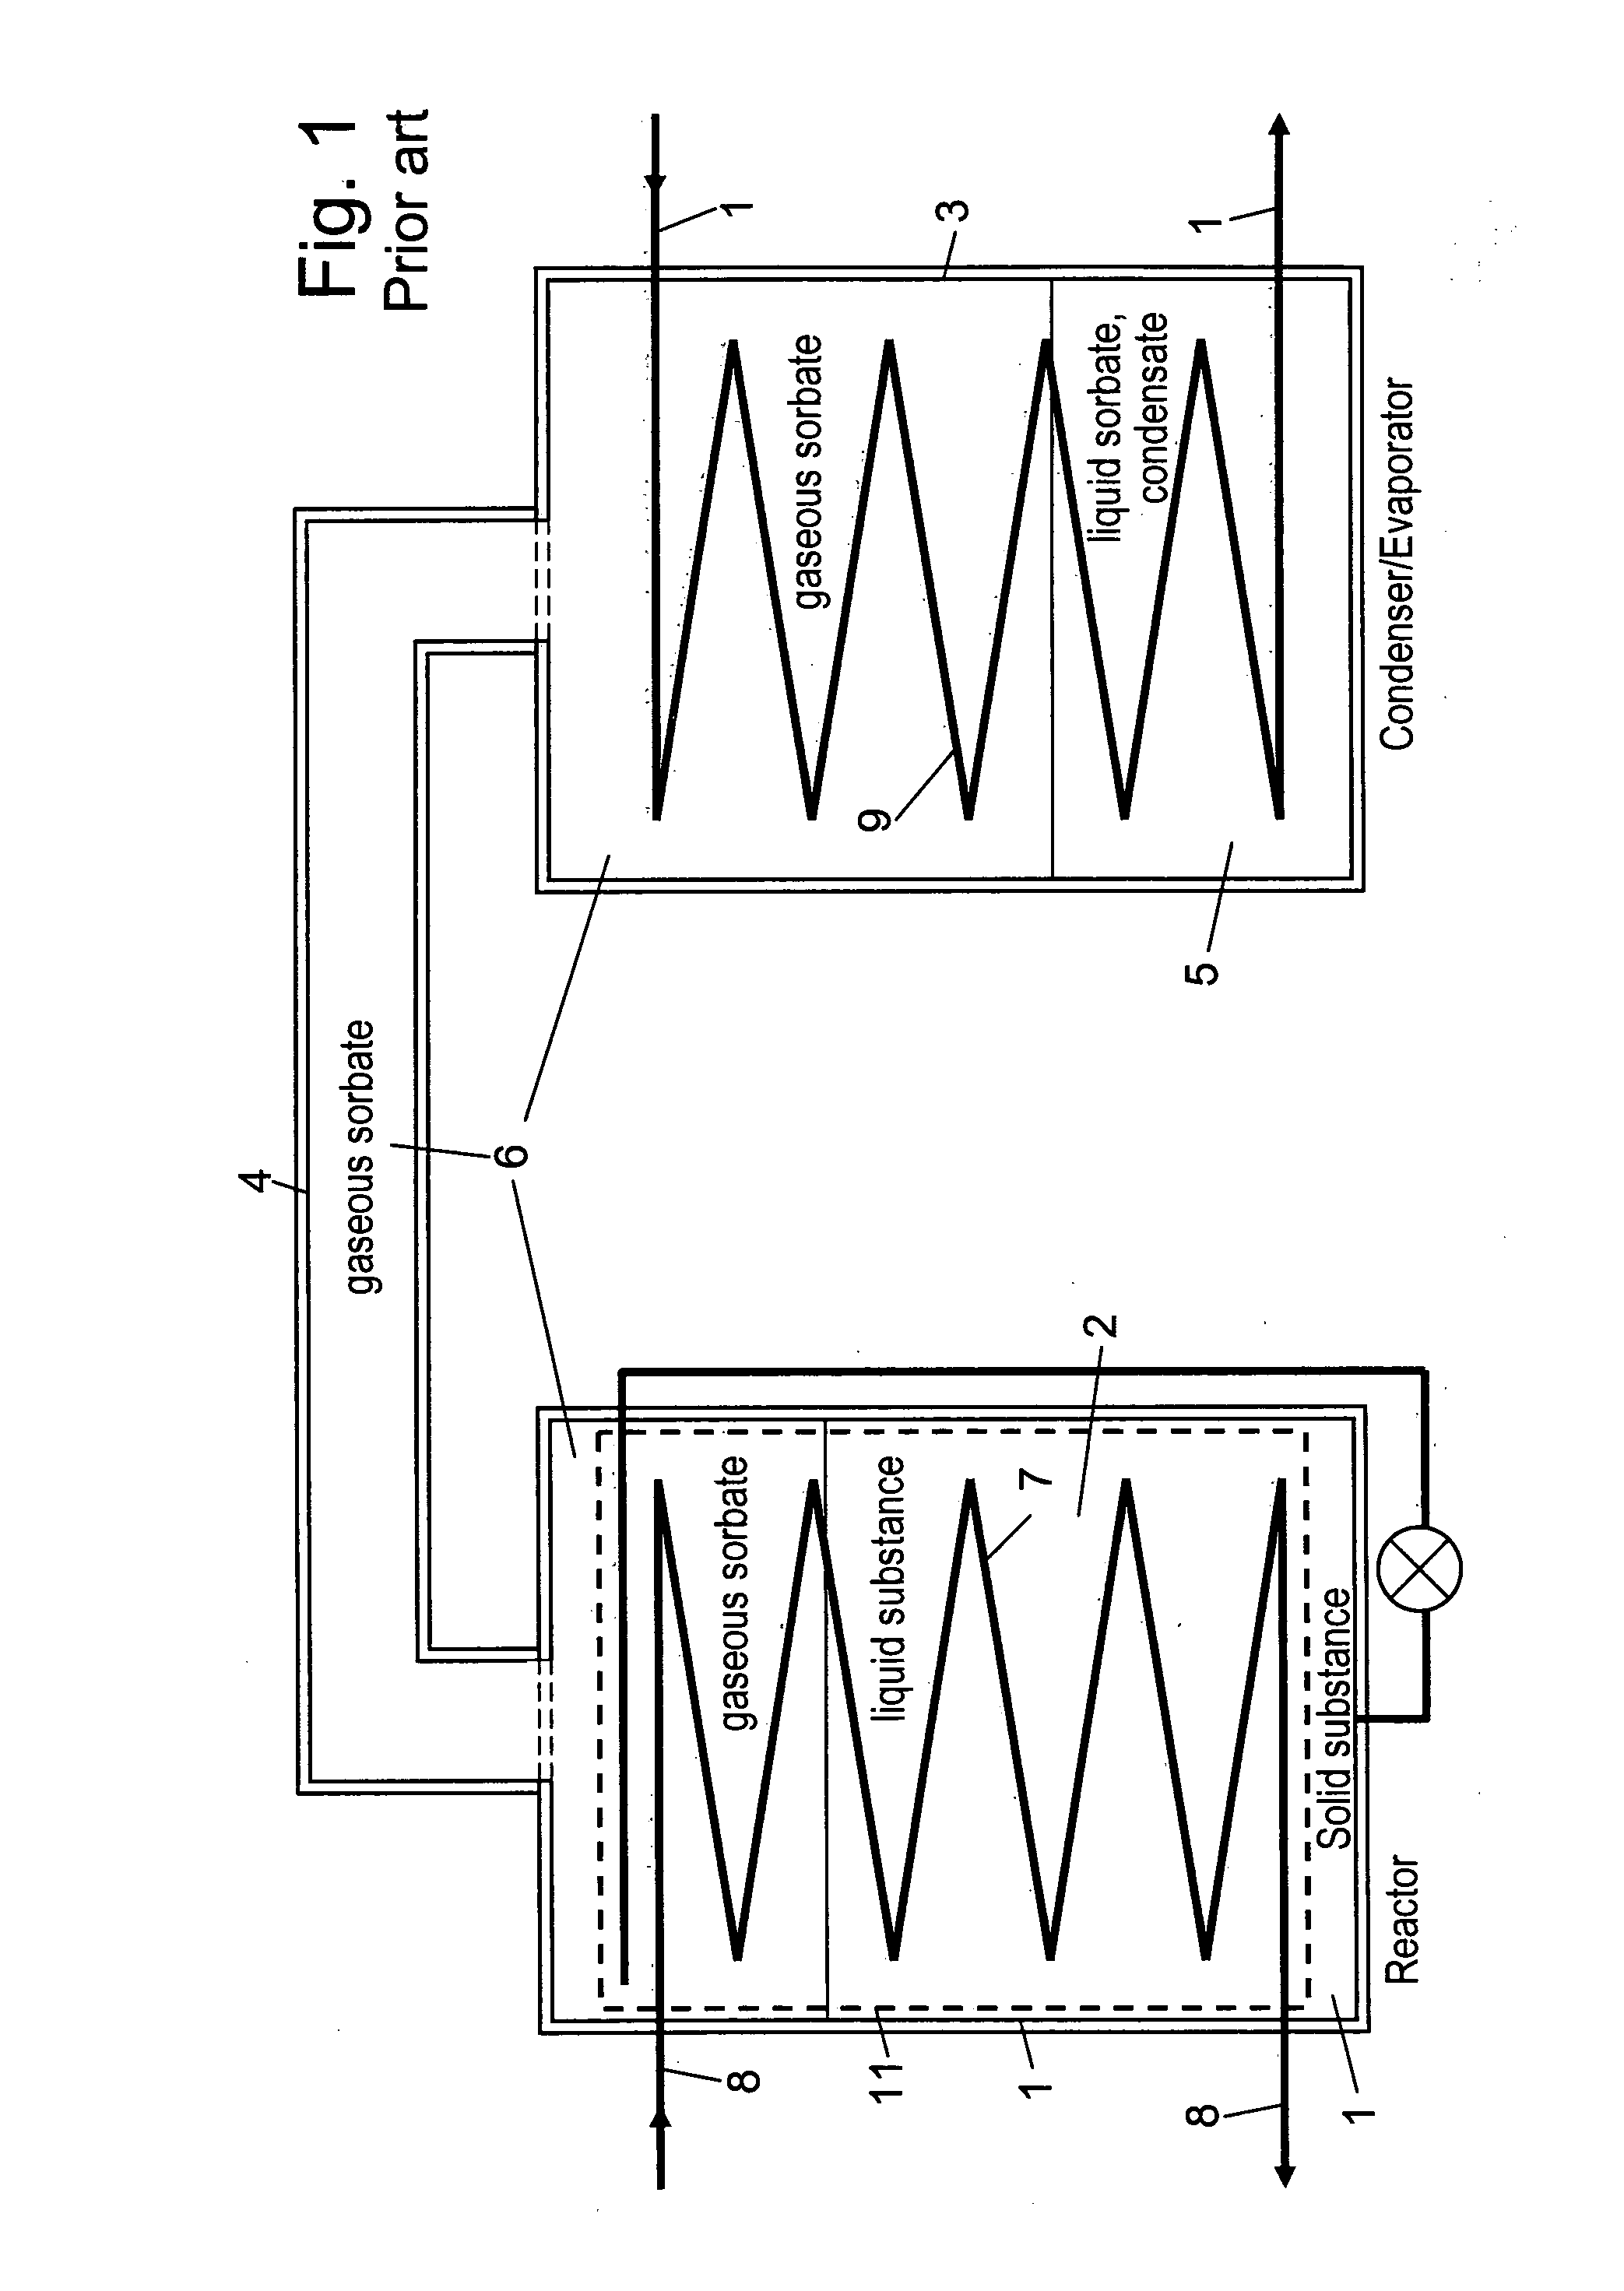 Chemical heat pump working with a hybrid substance